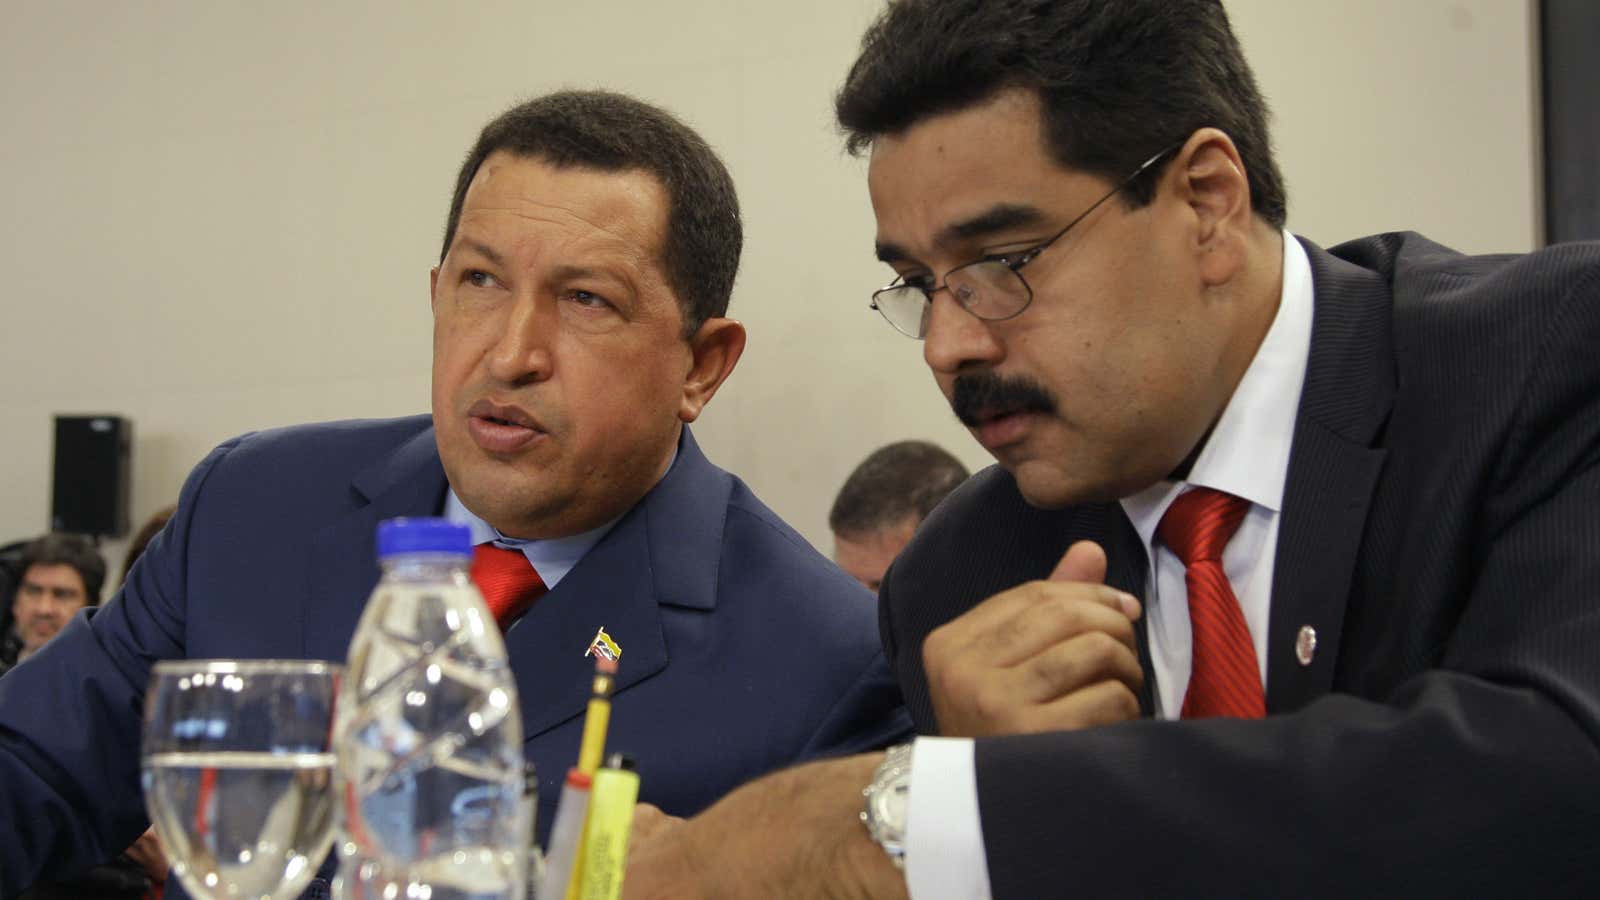 It won’t be easy for the less dynamic Nicolas Maduro to follow in Chávez’s footsteps.